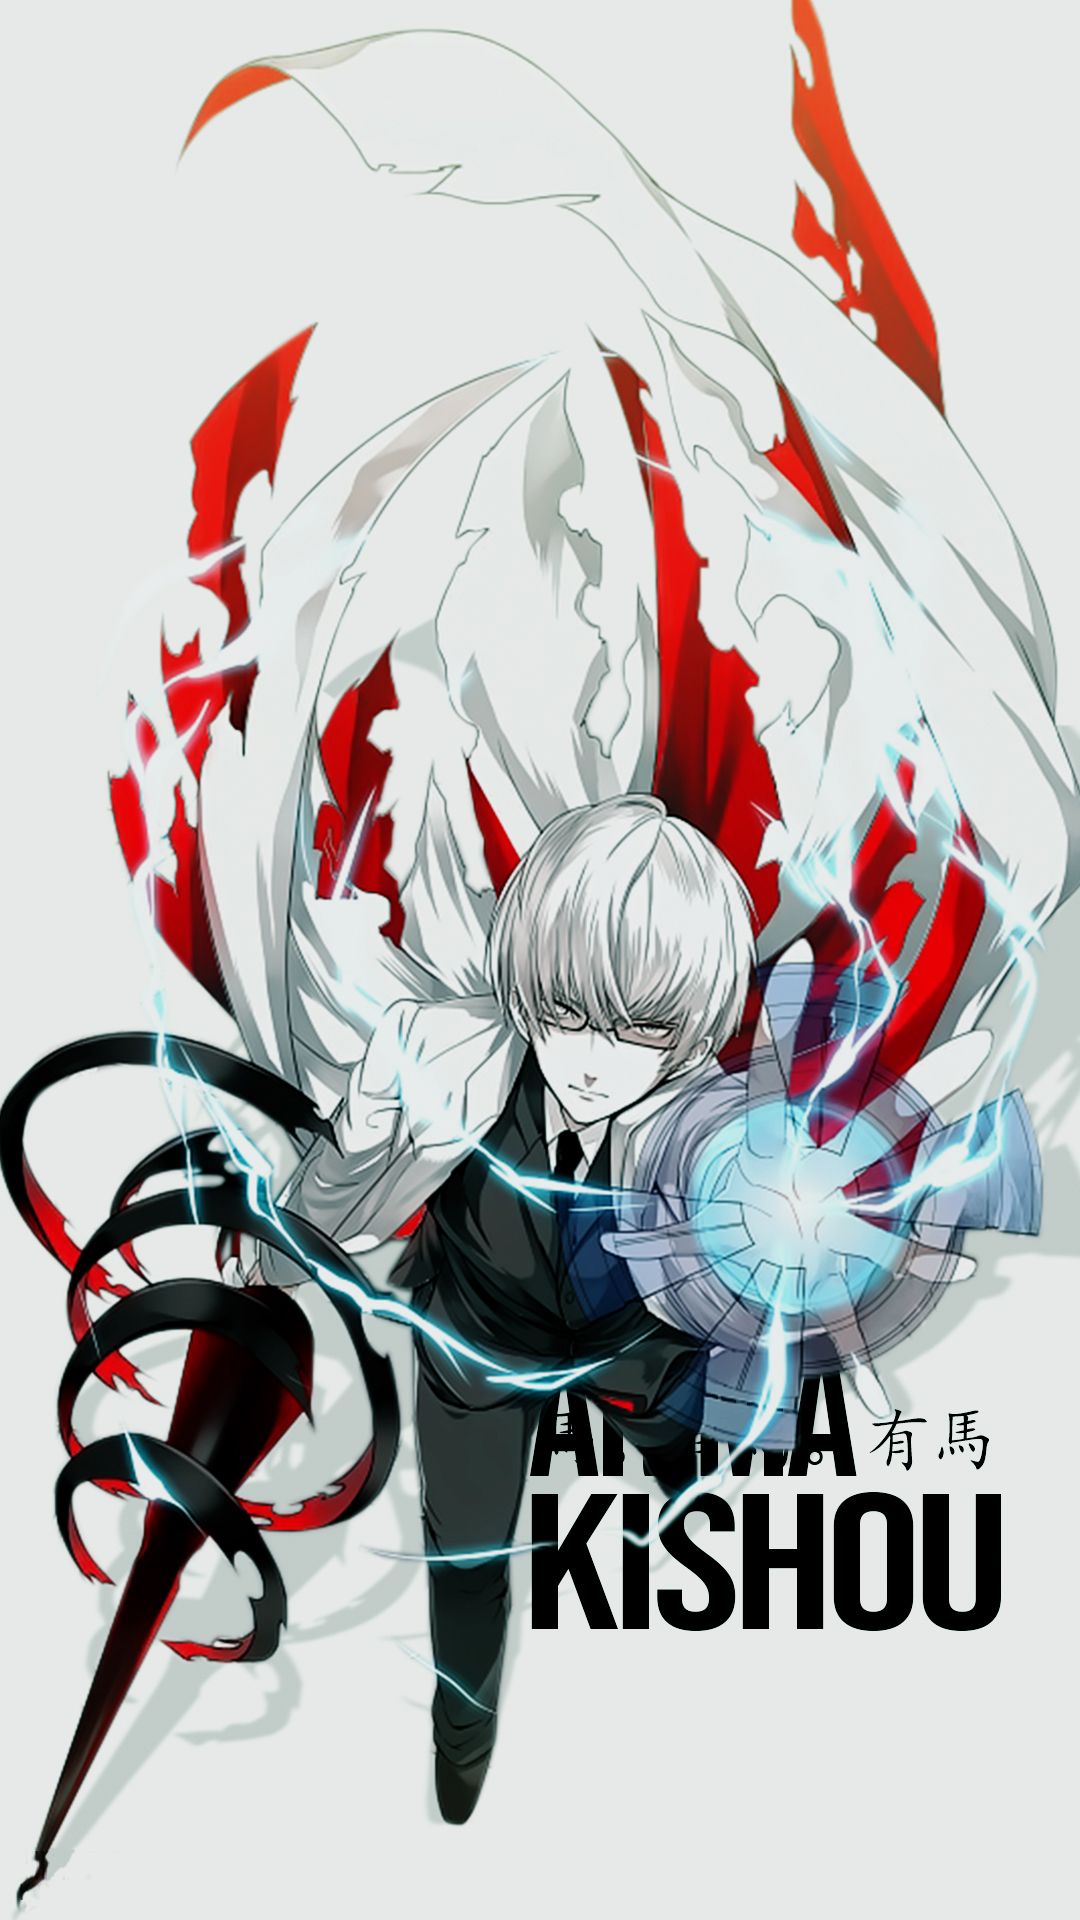 arima kishou from tokyo ghoul do you want custom anime tshirt i will design it for you. Tokyo ghoul wallpaper, Tokyo ghoul, Tokyo ghoul arima